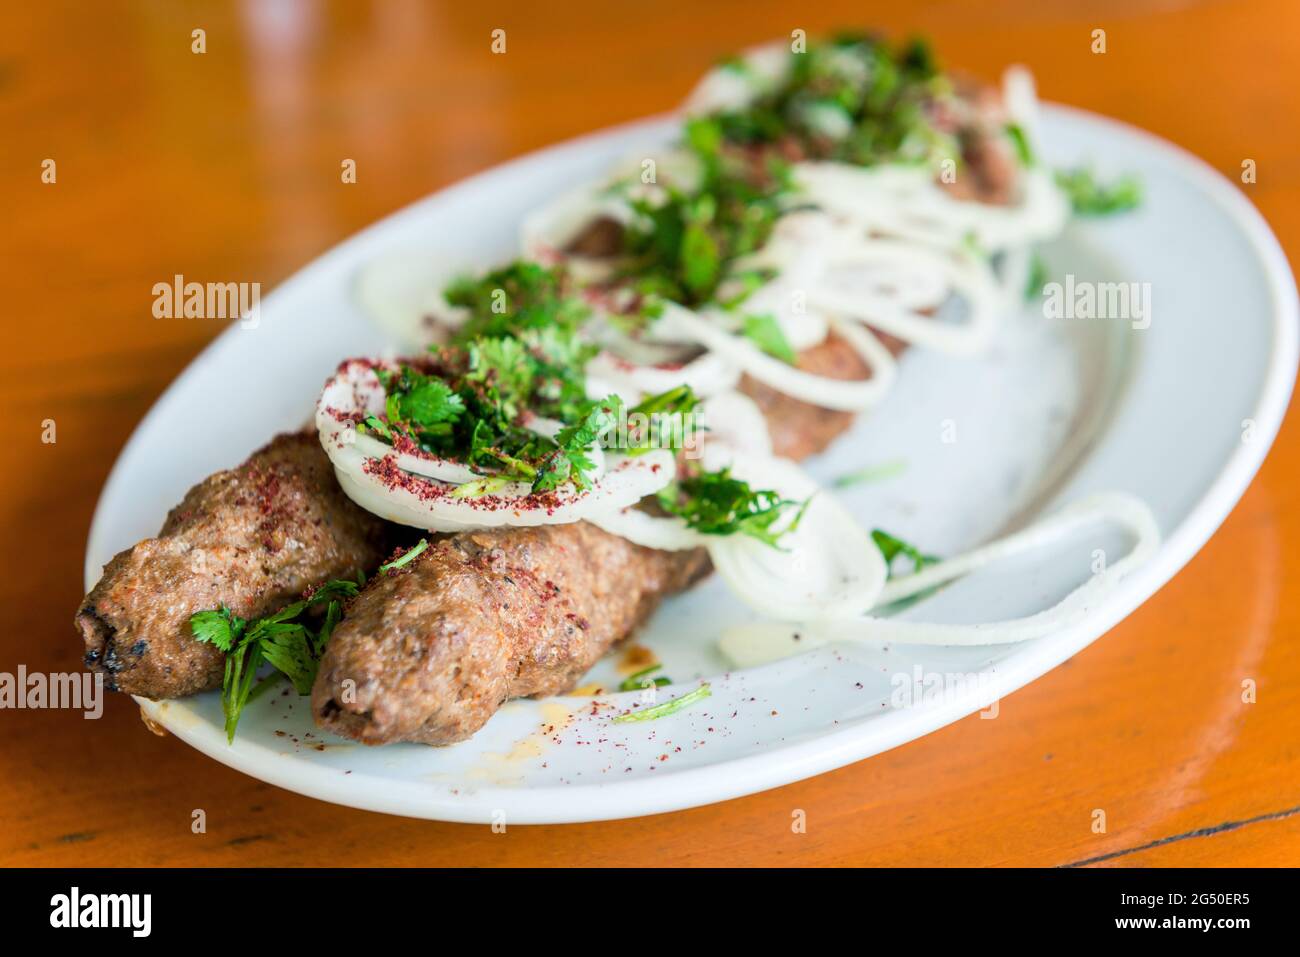 Grilled kebabs on the plate and fresh vegetables Stock Photo